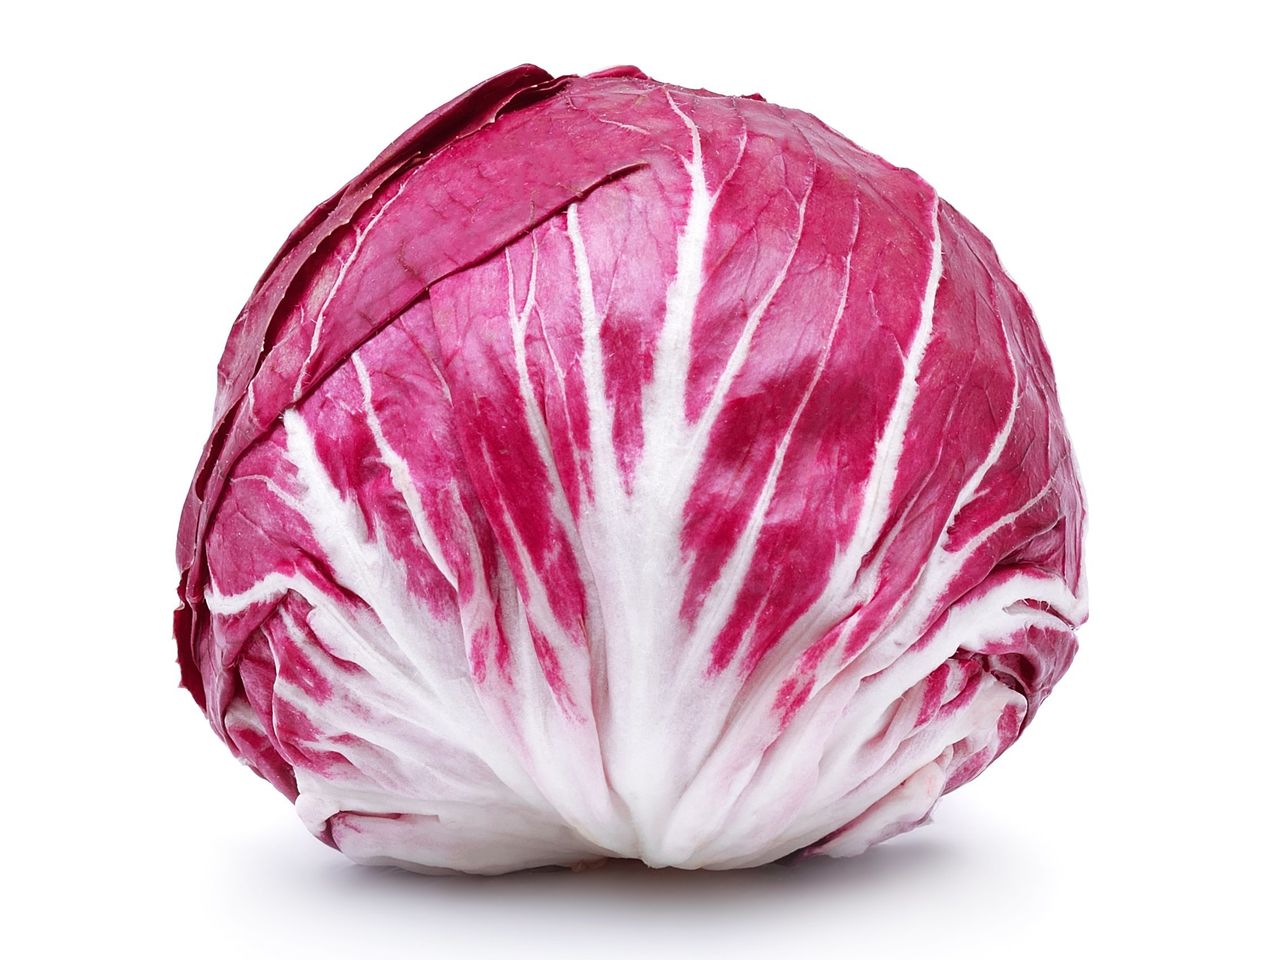 15-facts-about-radicchio